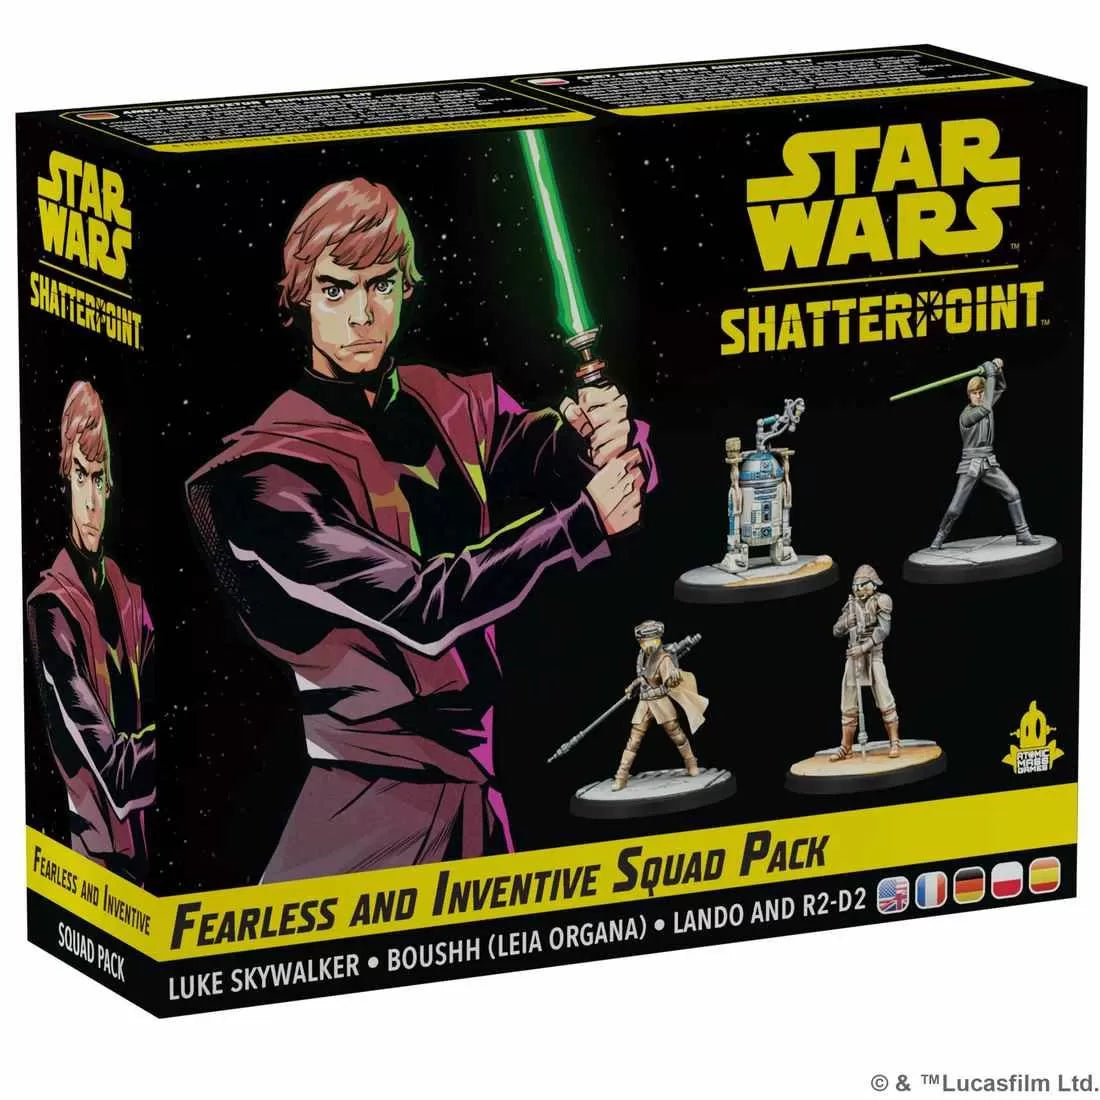 Star Wars Shatterpoint: Fearless and Inventive Luke Skywalker Squad Pack